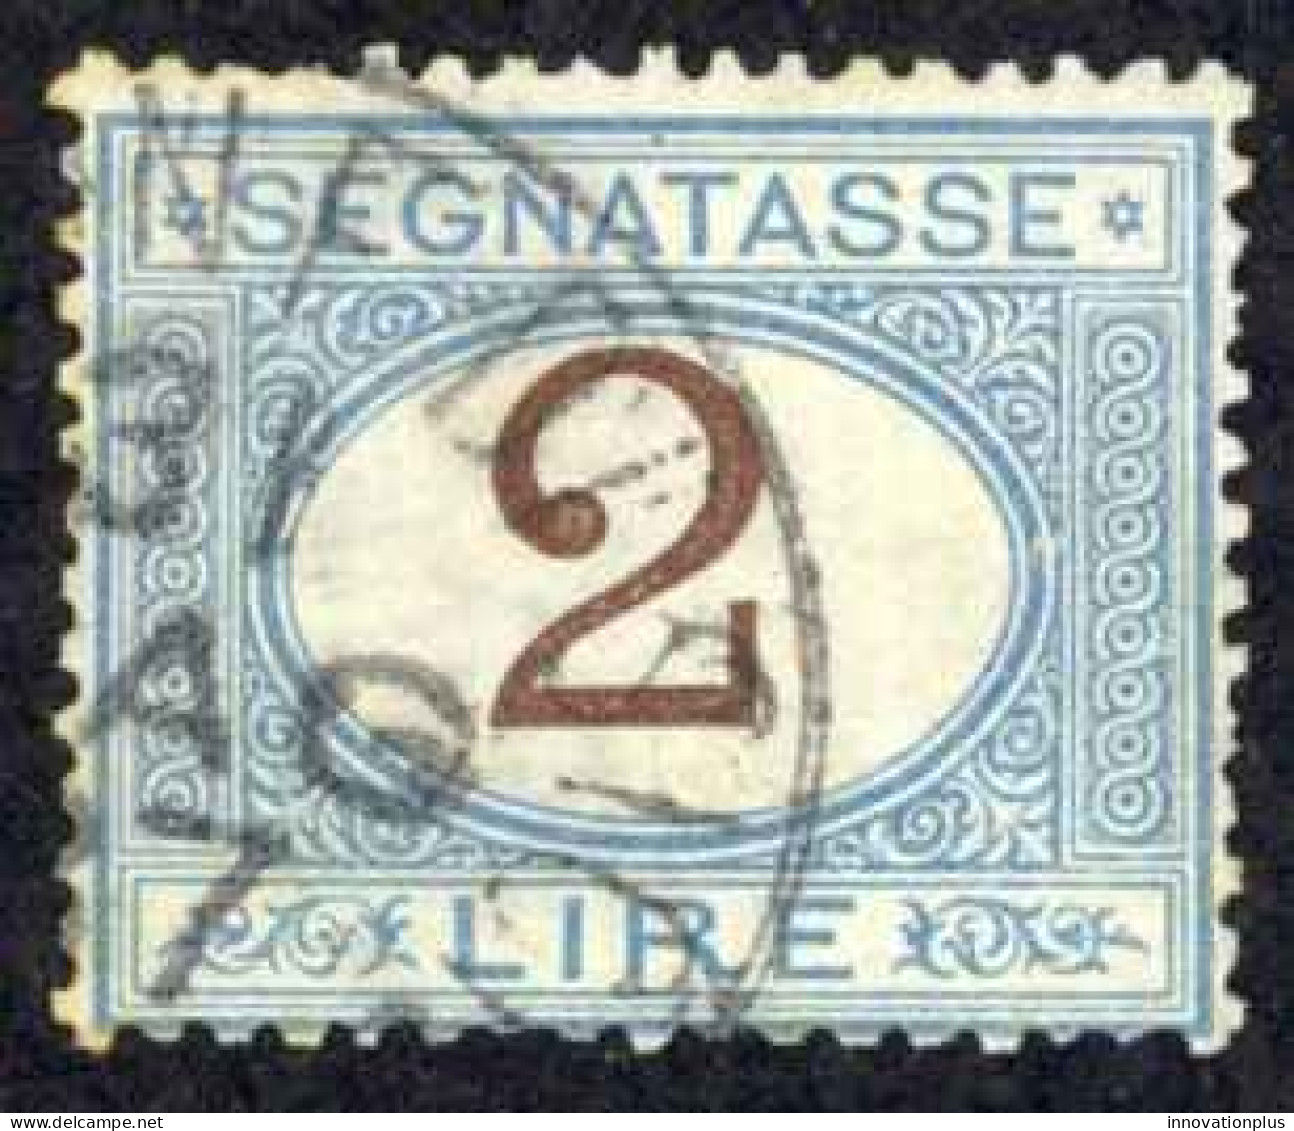 Italy Sc# J15 Used (a) 1870-1925 2l Light Blue & Brown Postage Due - Strafport